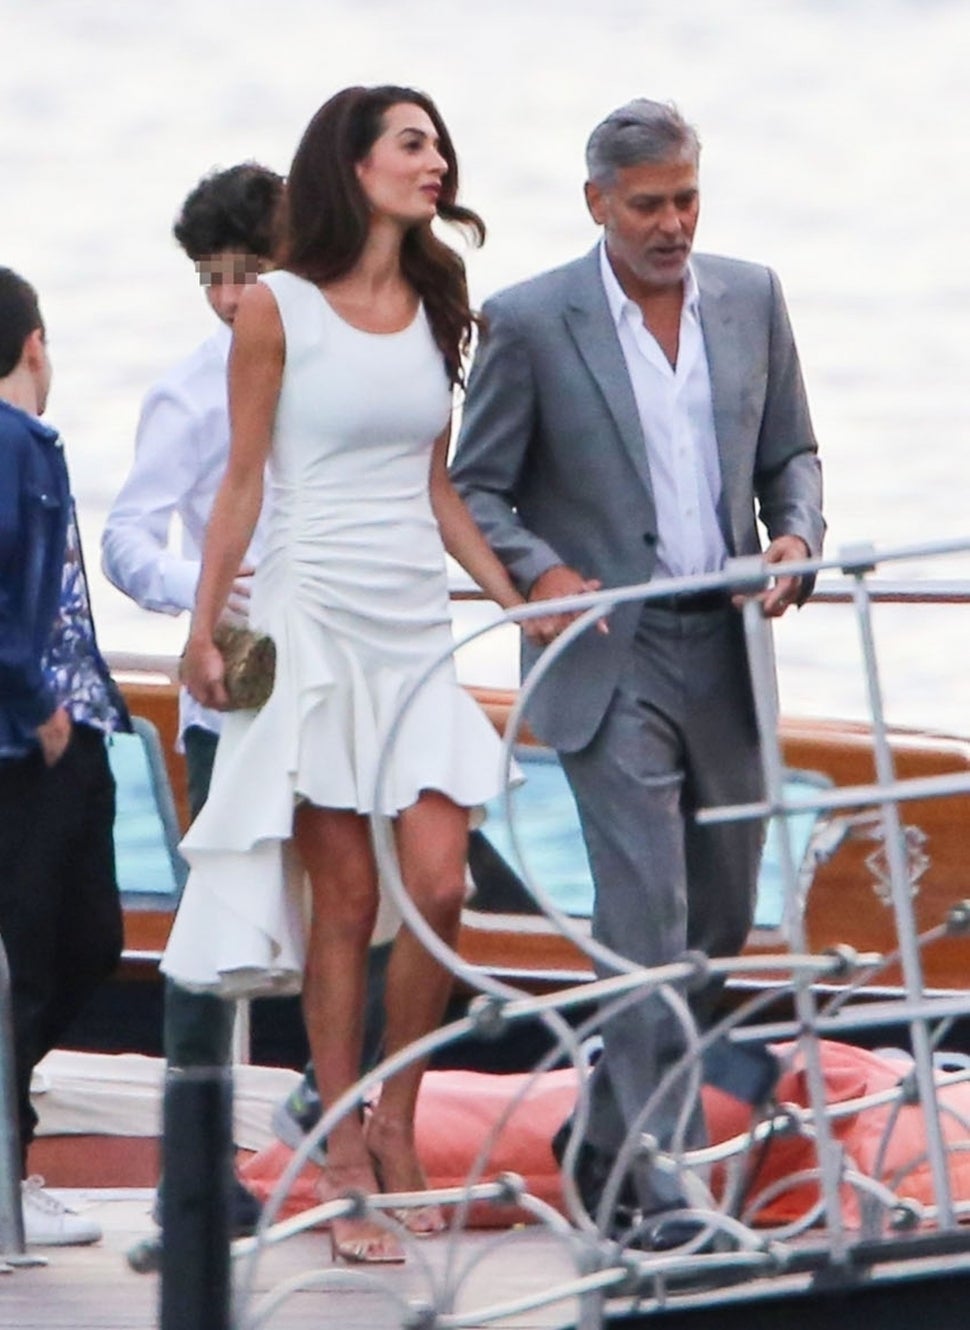 George Clooney and Wife Amal Have Fancy Night Out in Italy With Family: Pic